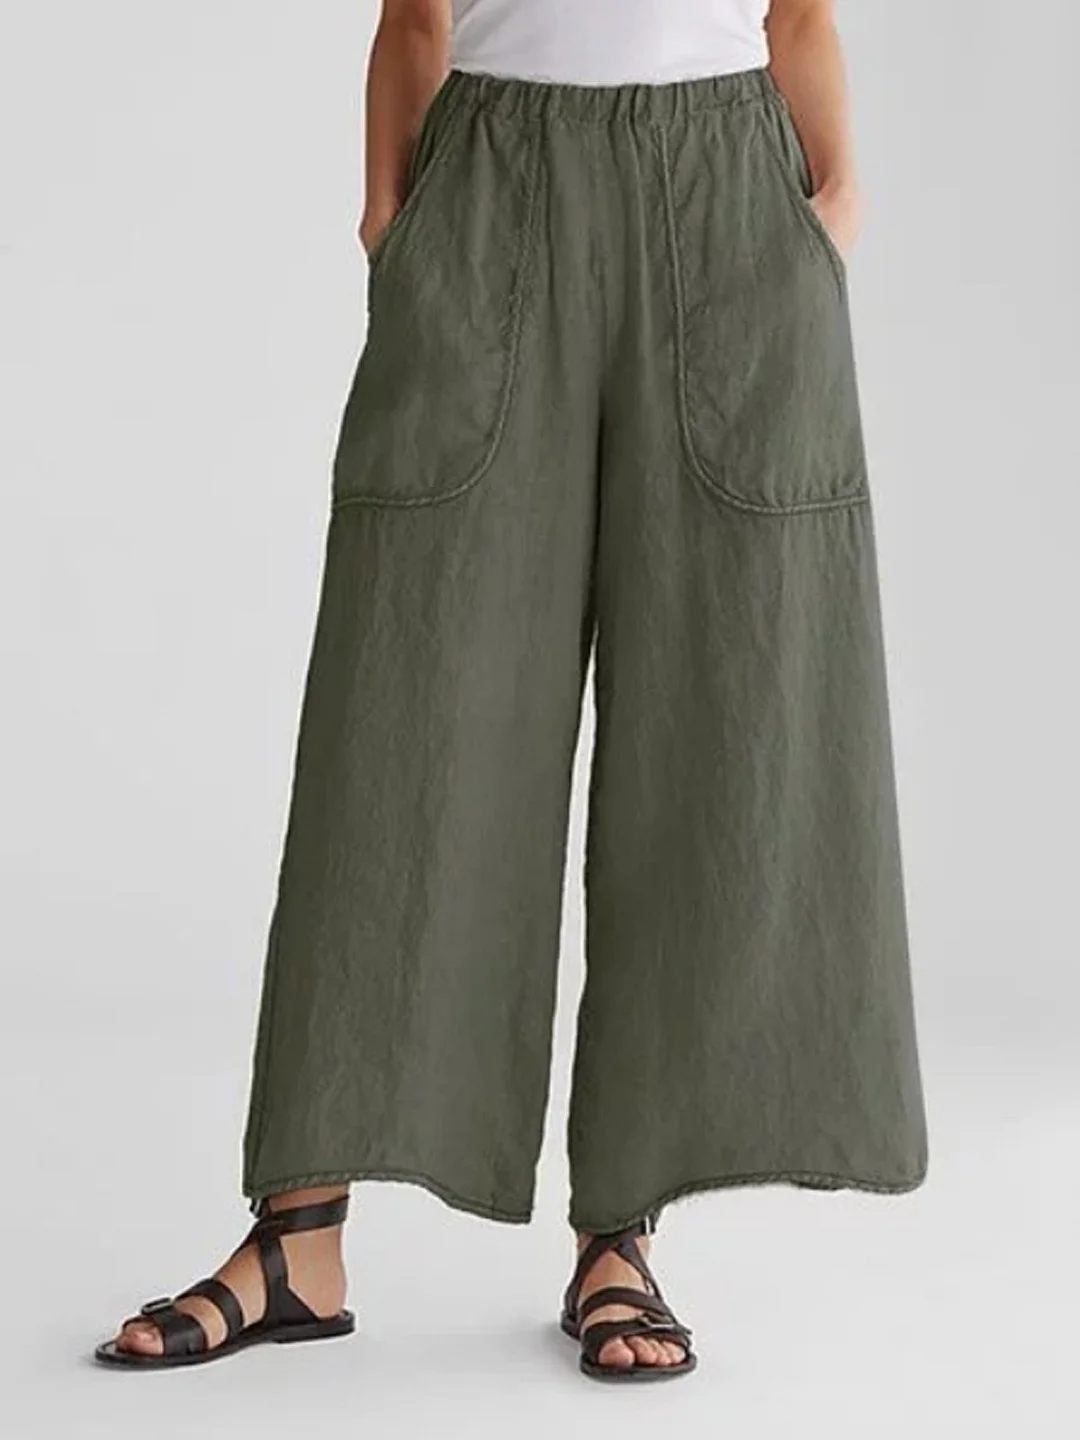 Pocketed Cotton Linen Pants Wide-Legged Mid-Waist Casual Pants